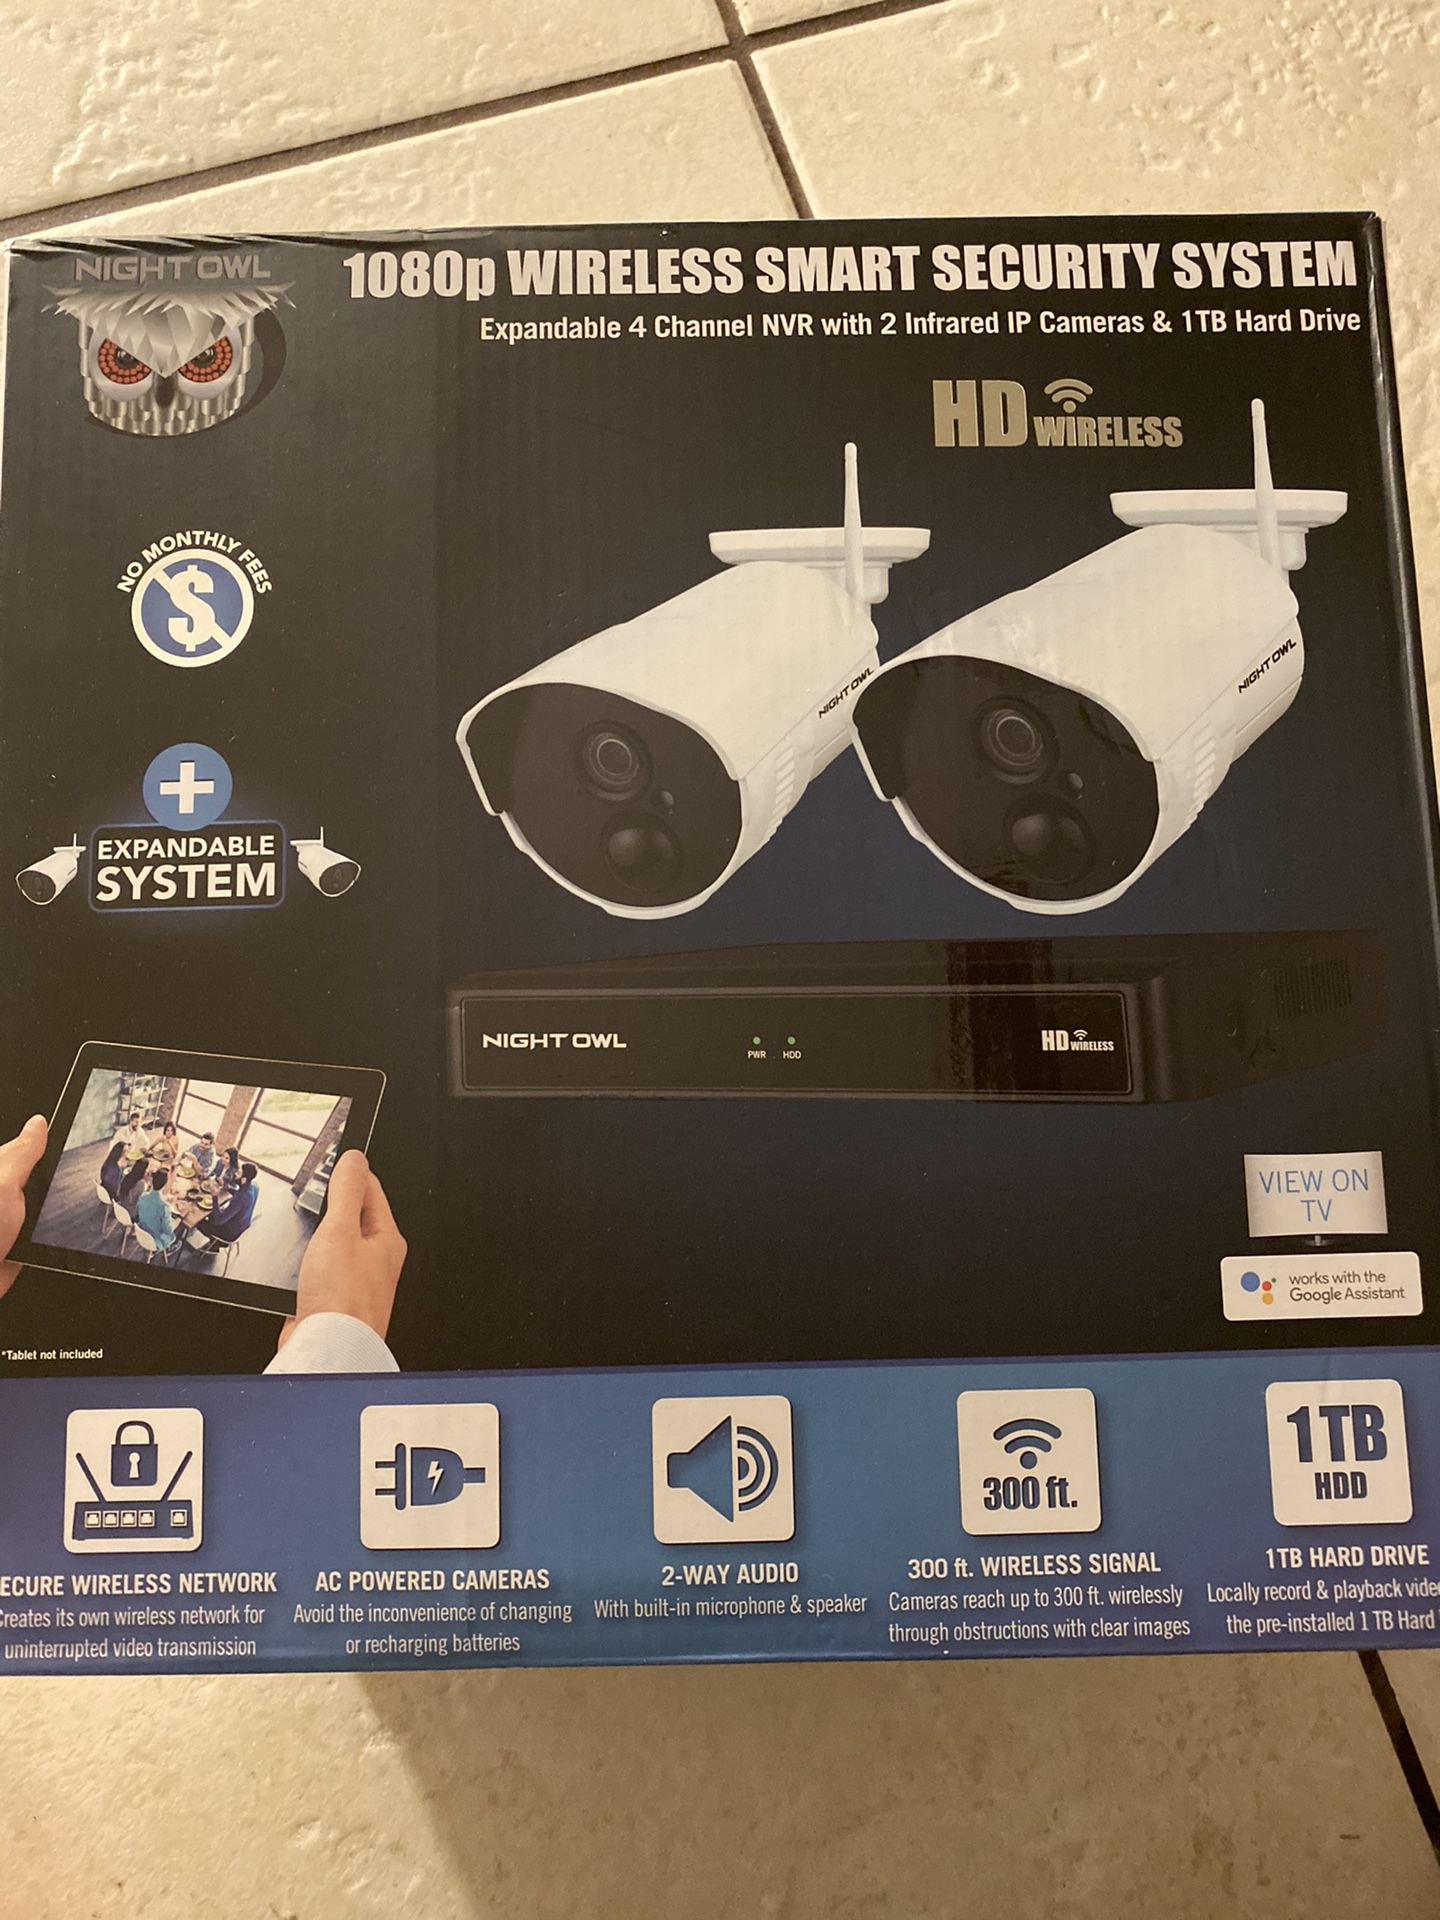 Night owl 1080p wireless smart security systems